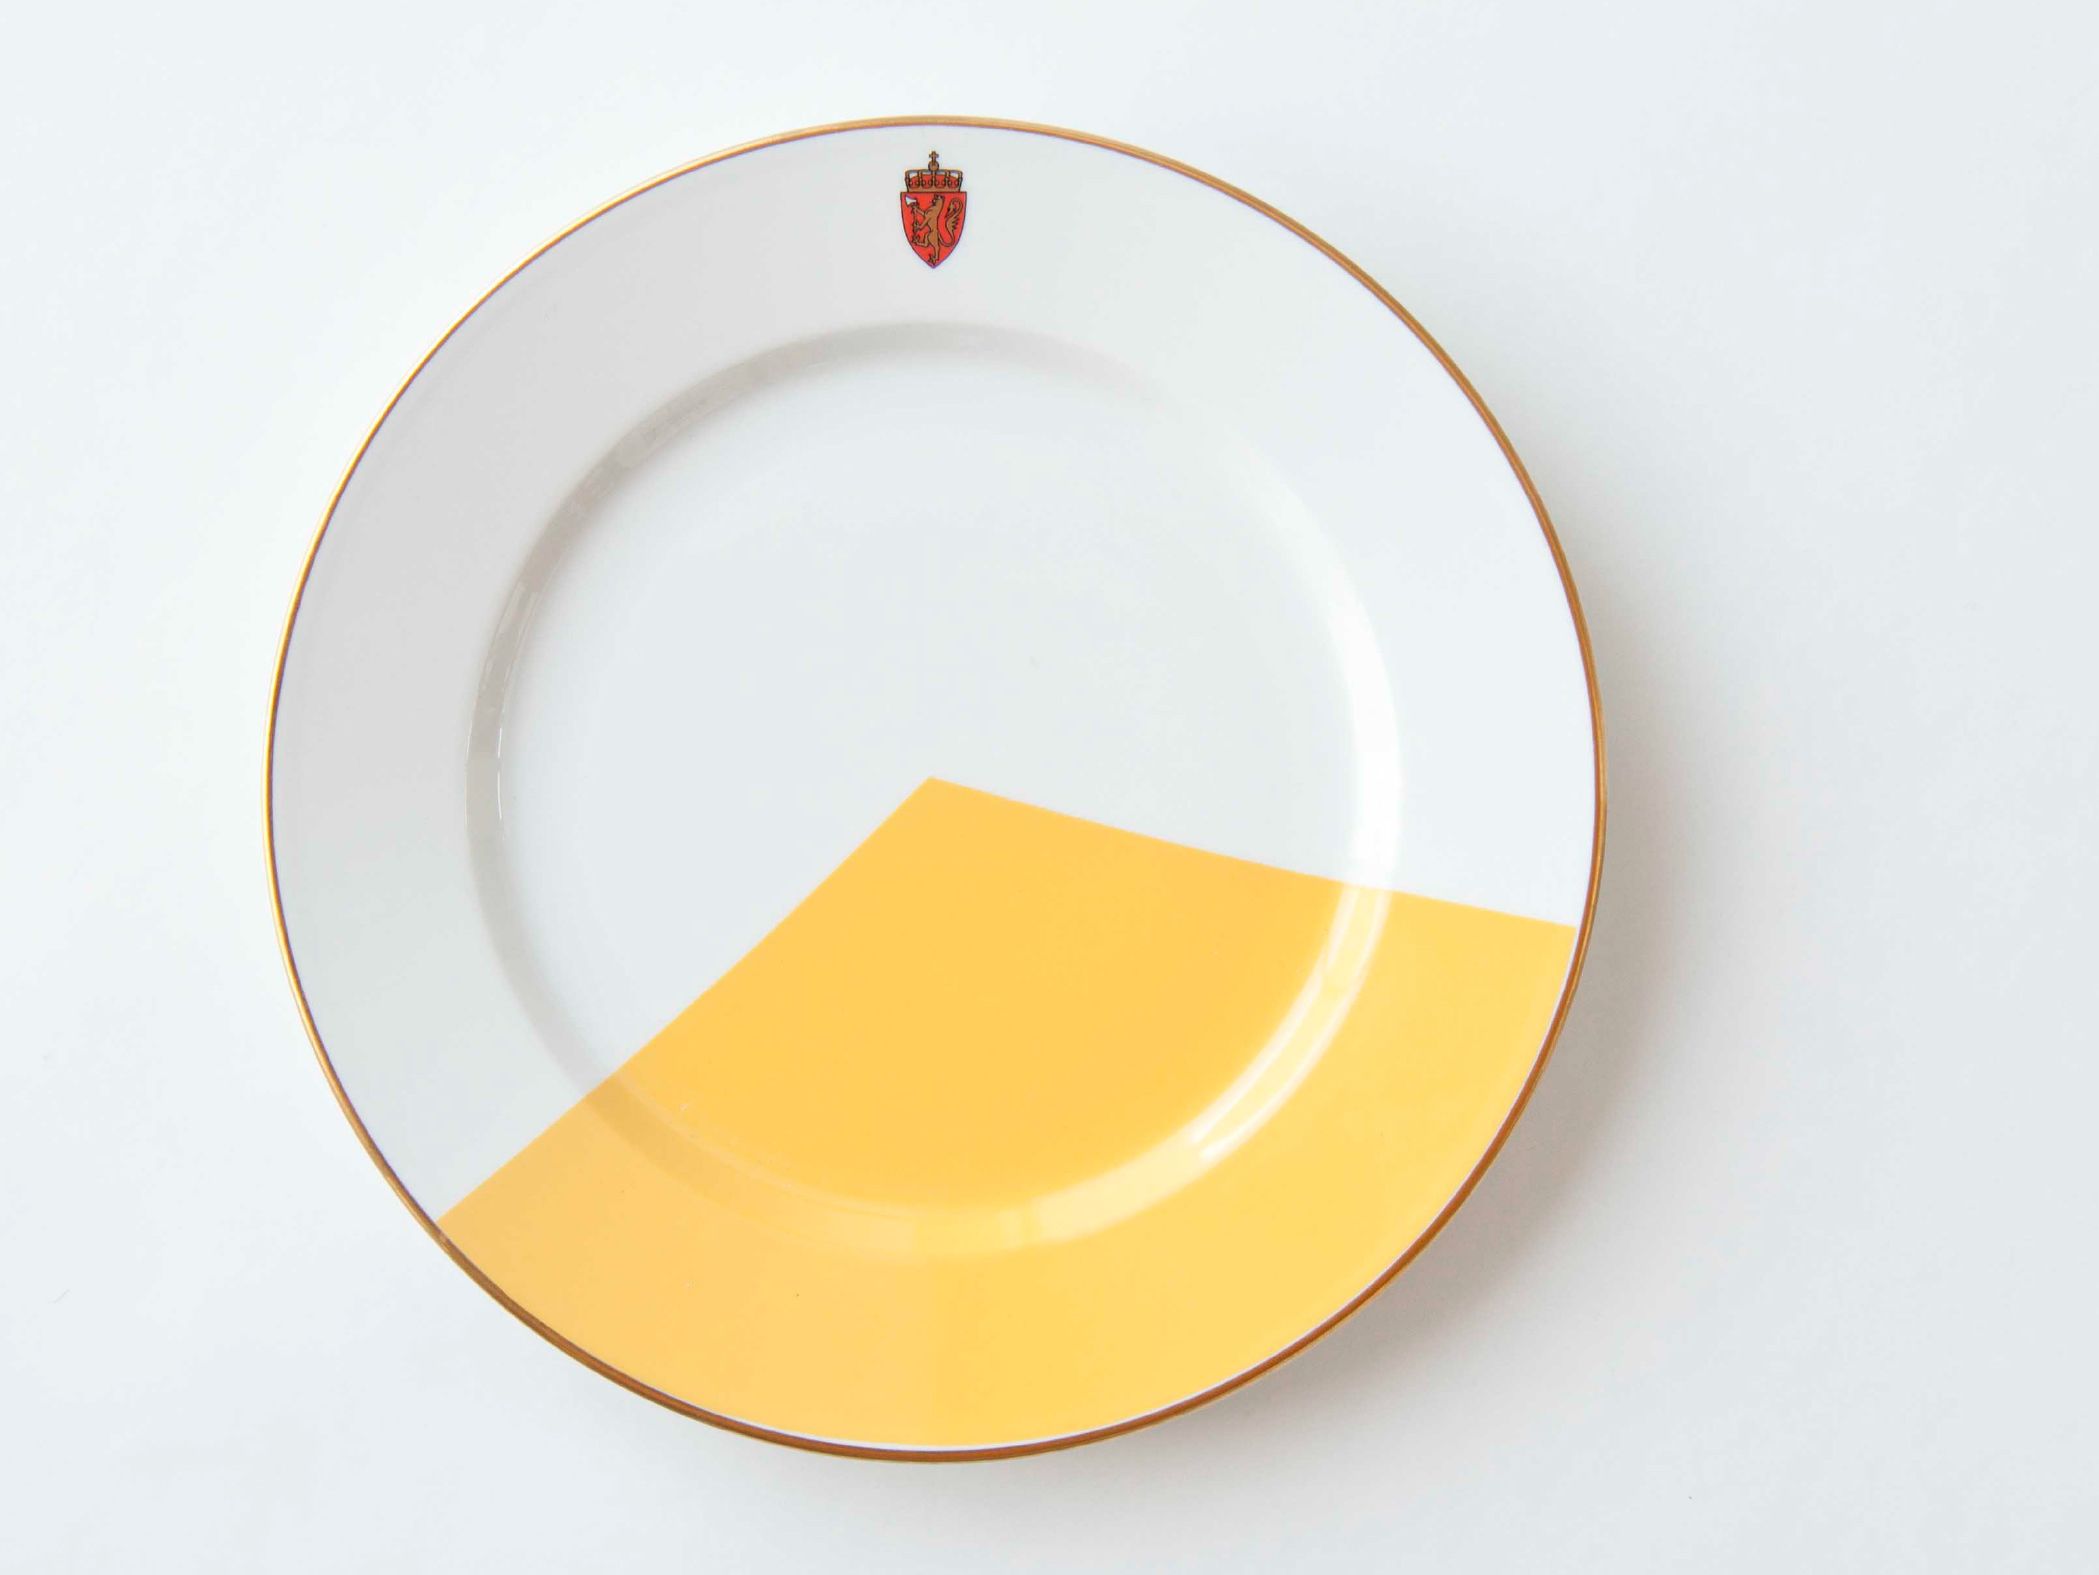 Plate with geometric yellow design